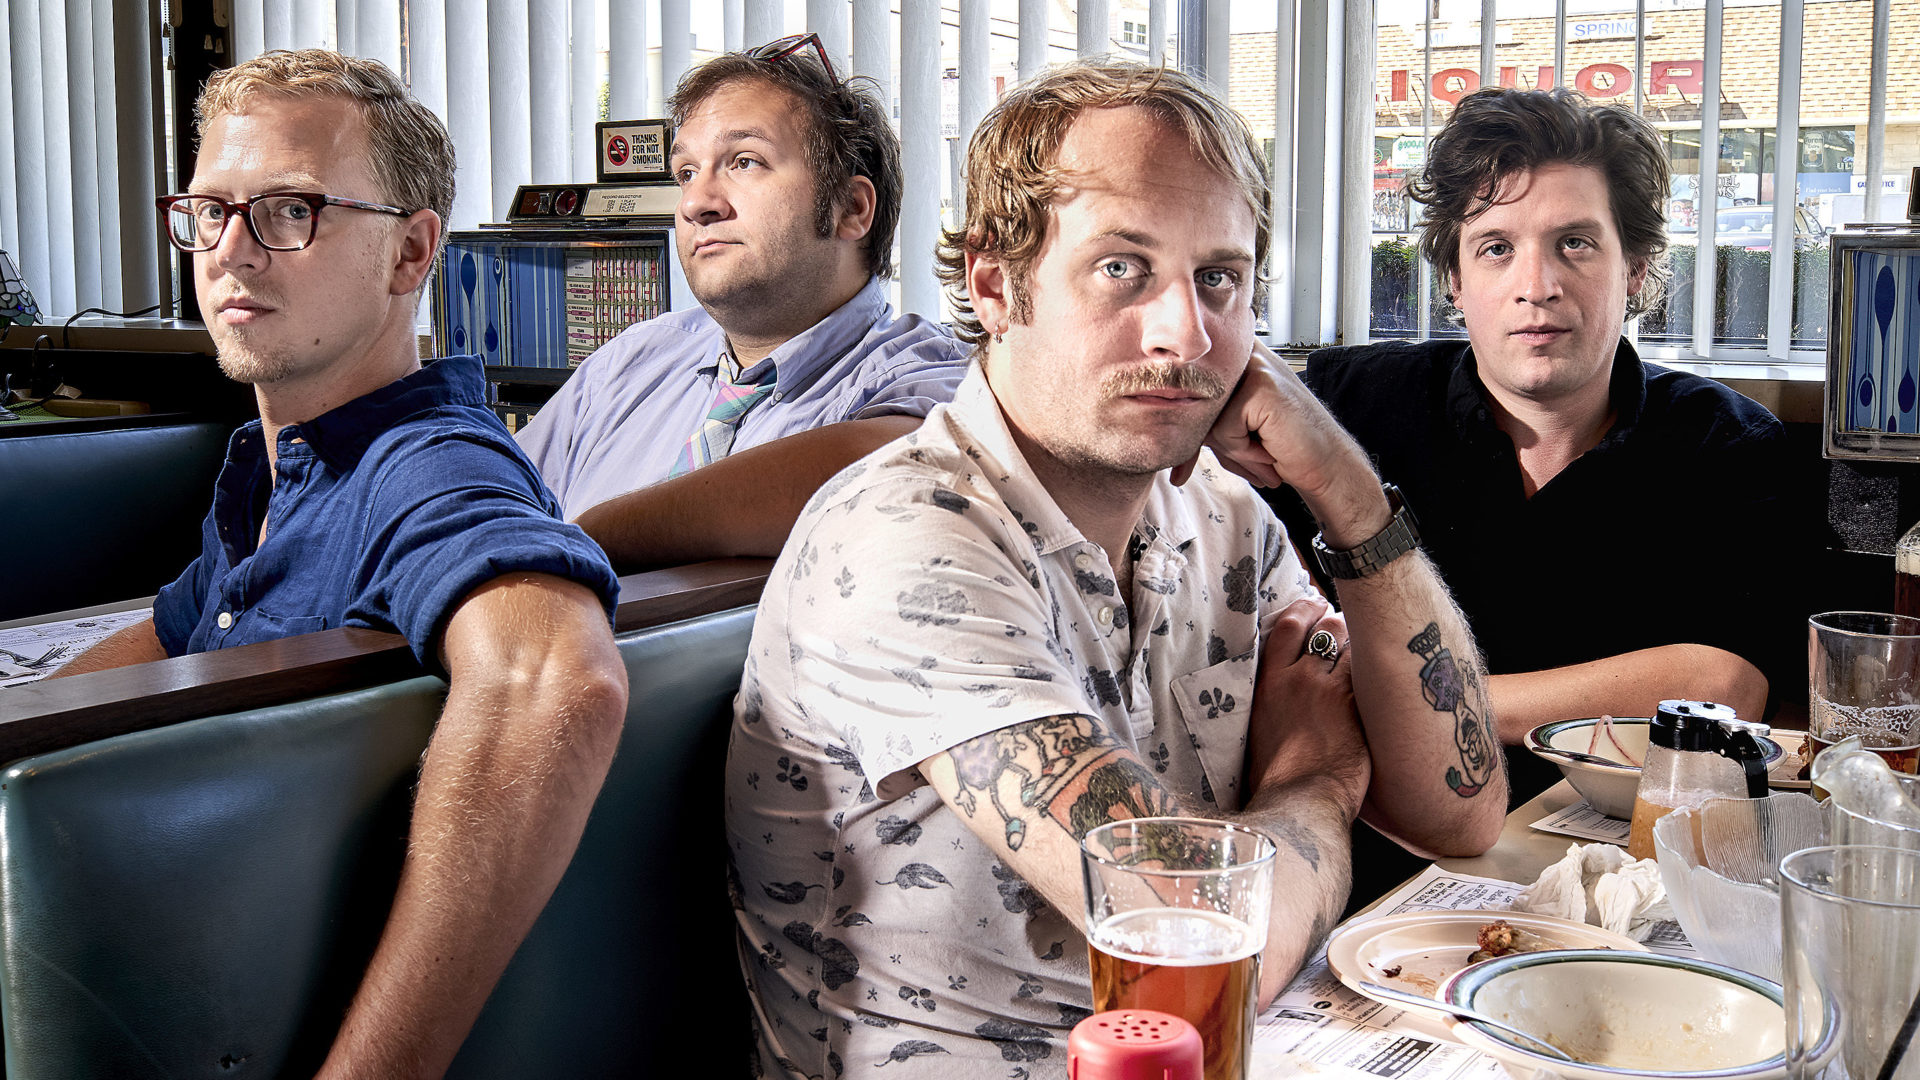 The bandmembers of Deer Tick sit around a table at a diner. Press photo courtesy of the Mahaiwe